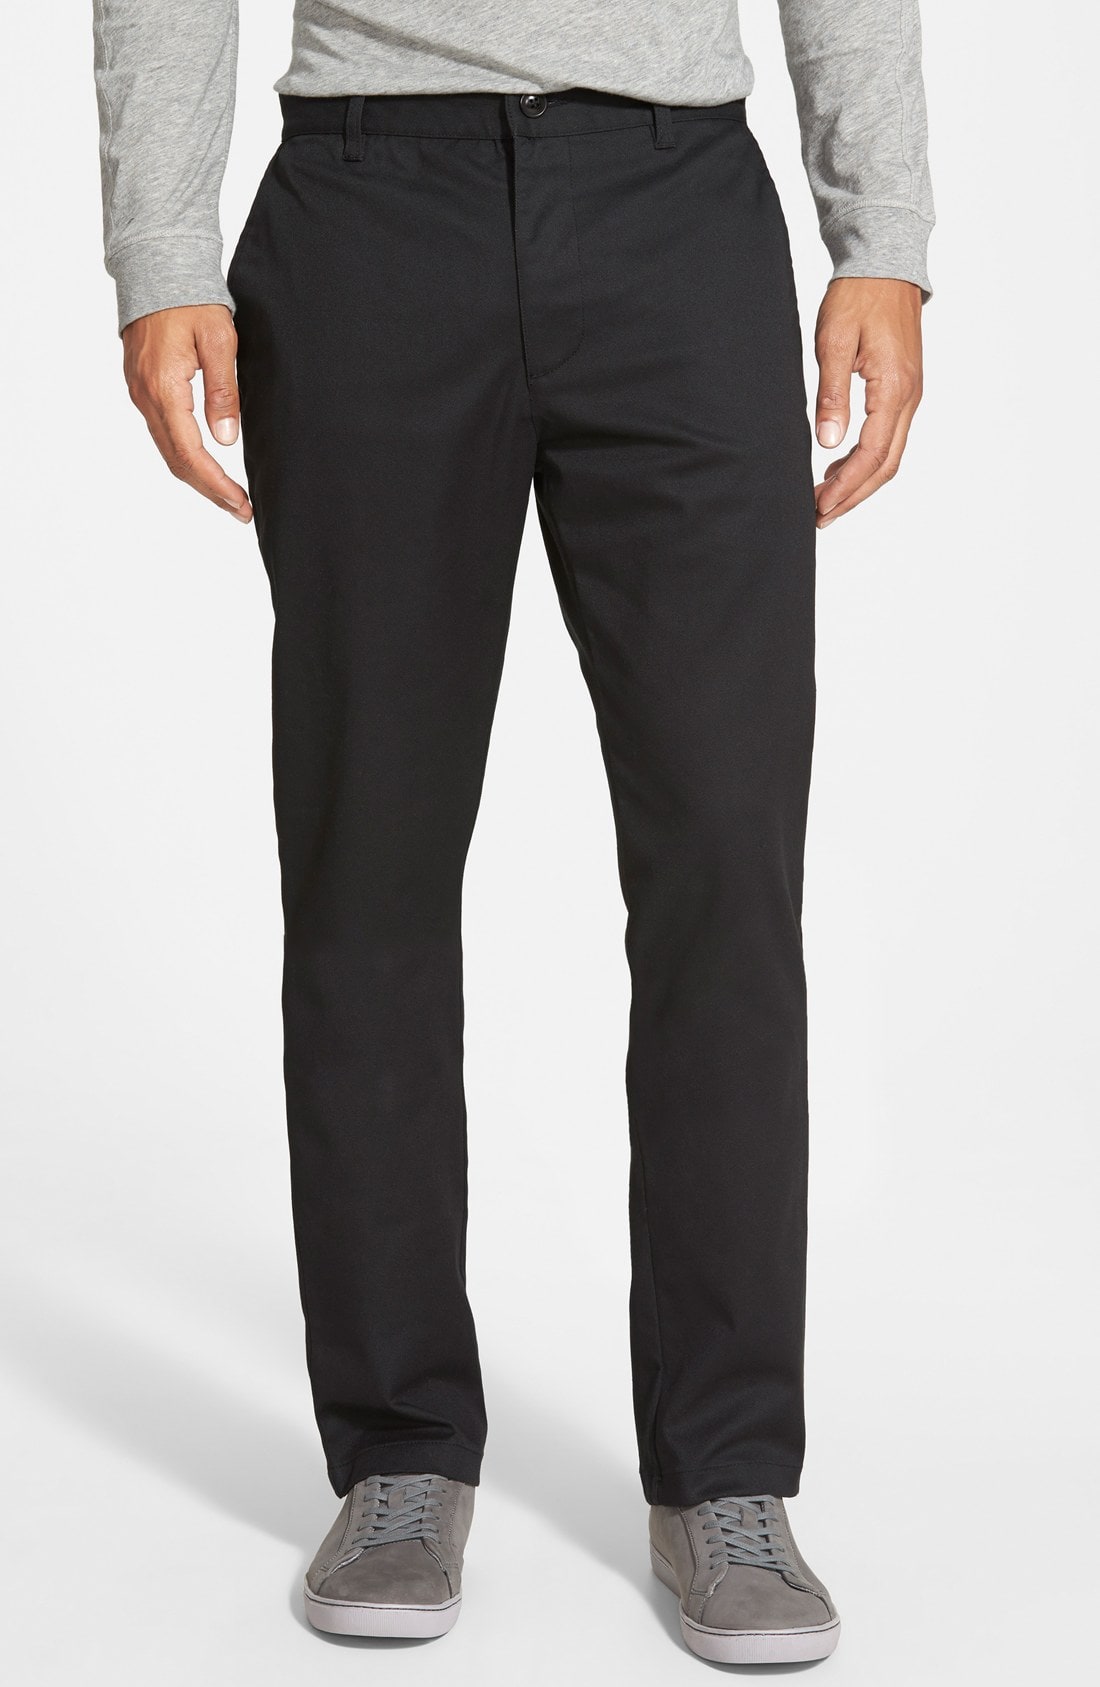 RVCA 'The Week-End' Slim Straight Leg Stretch Twill Chinos (Online Only)